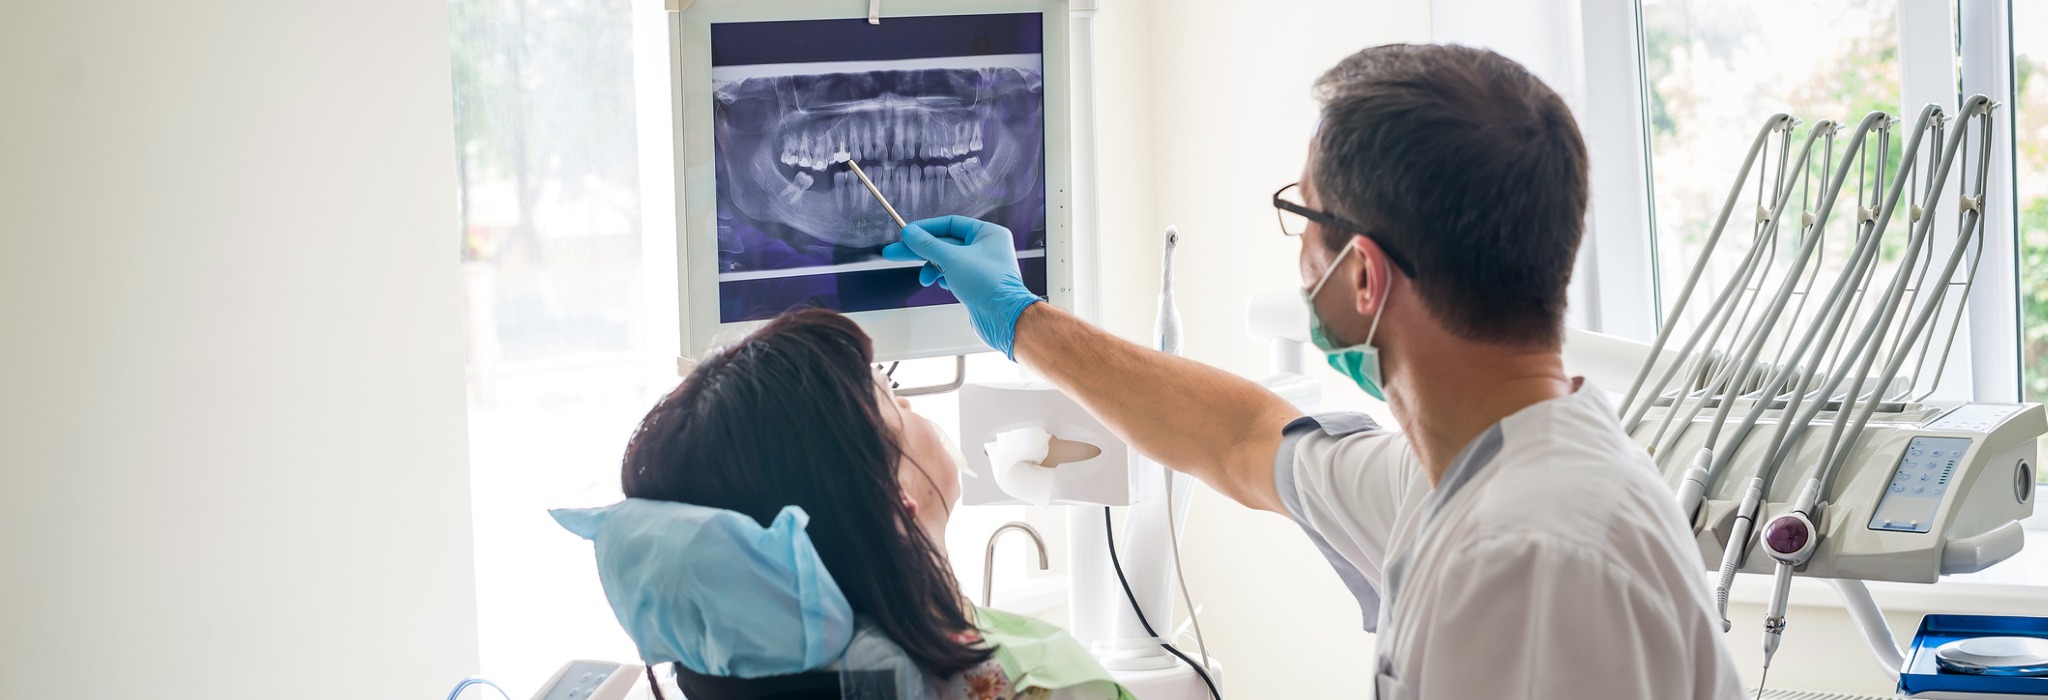 Dentist showing a tooth x-ray to a patient